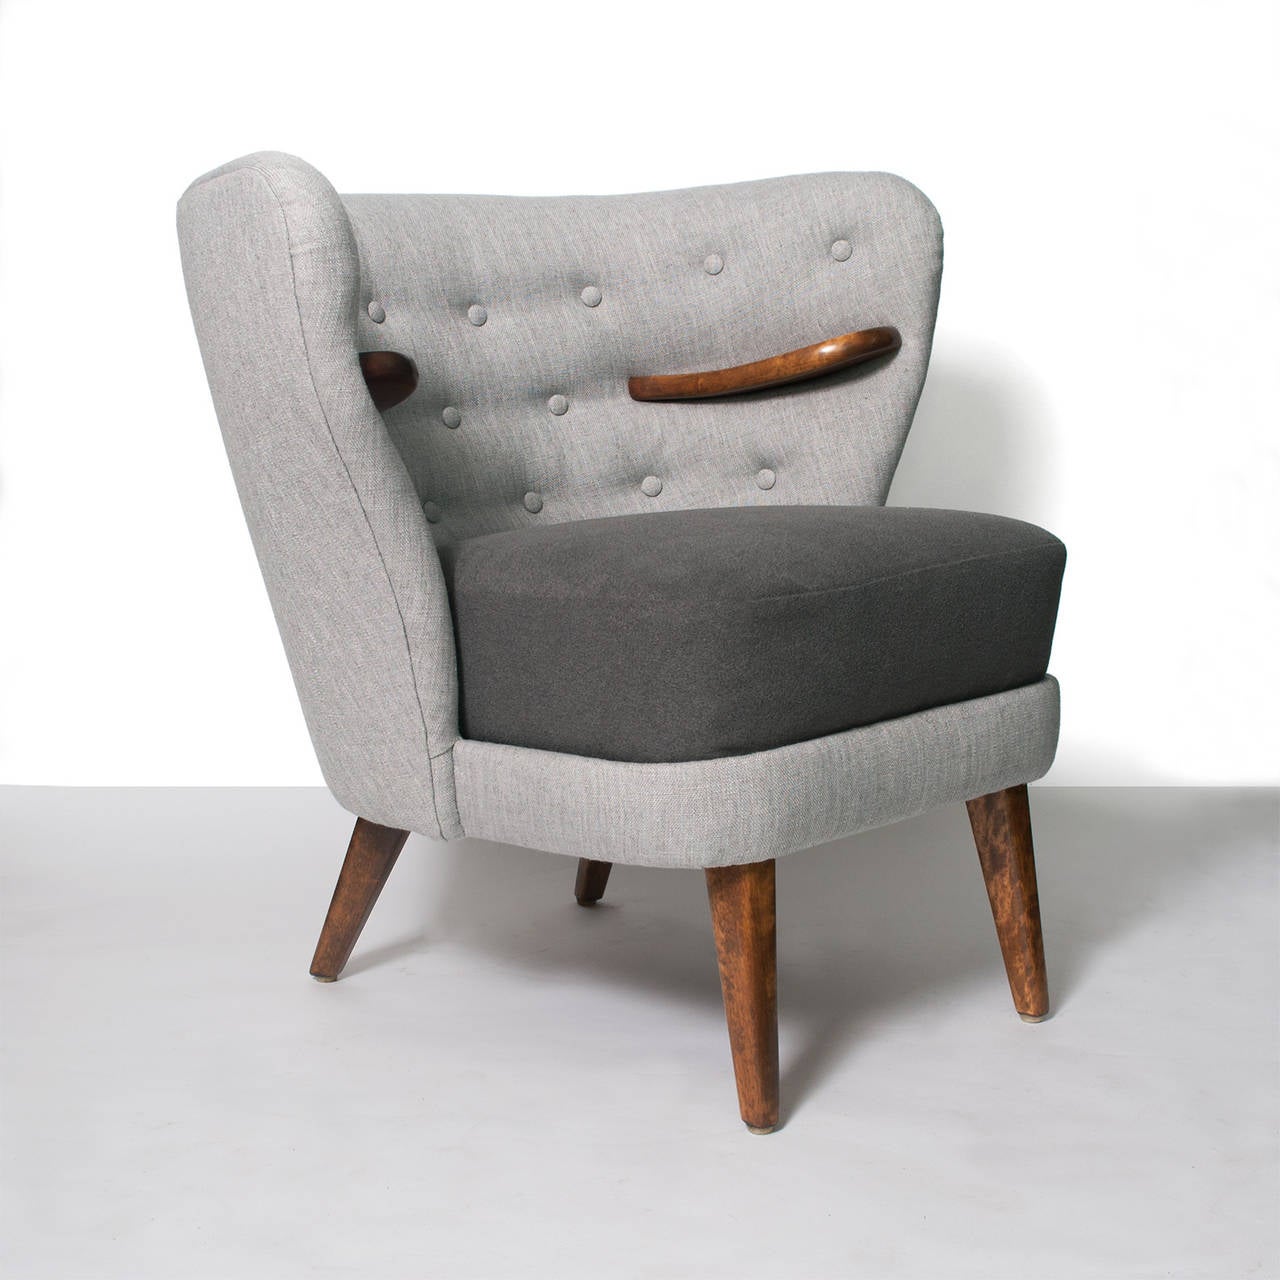 A Scandinavian modern mid-century wrap around wing chair with carved internal arms. This chair is detailed with 3 rows of button and a contrasting wool upholstered seat cushion. Arms and legs are stained solid birch. Newly upholstered and restored,